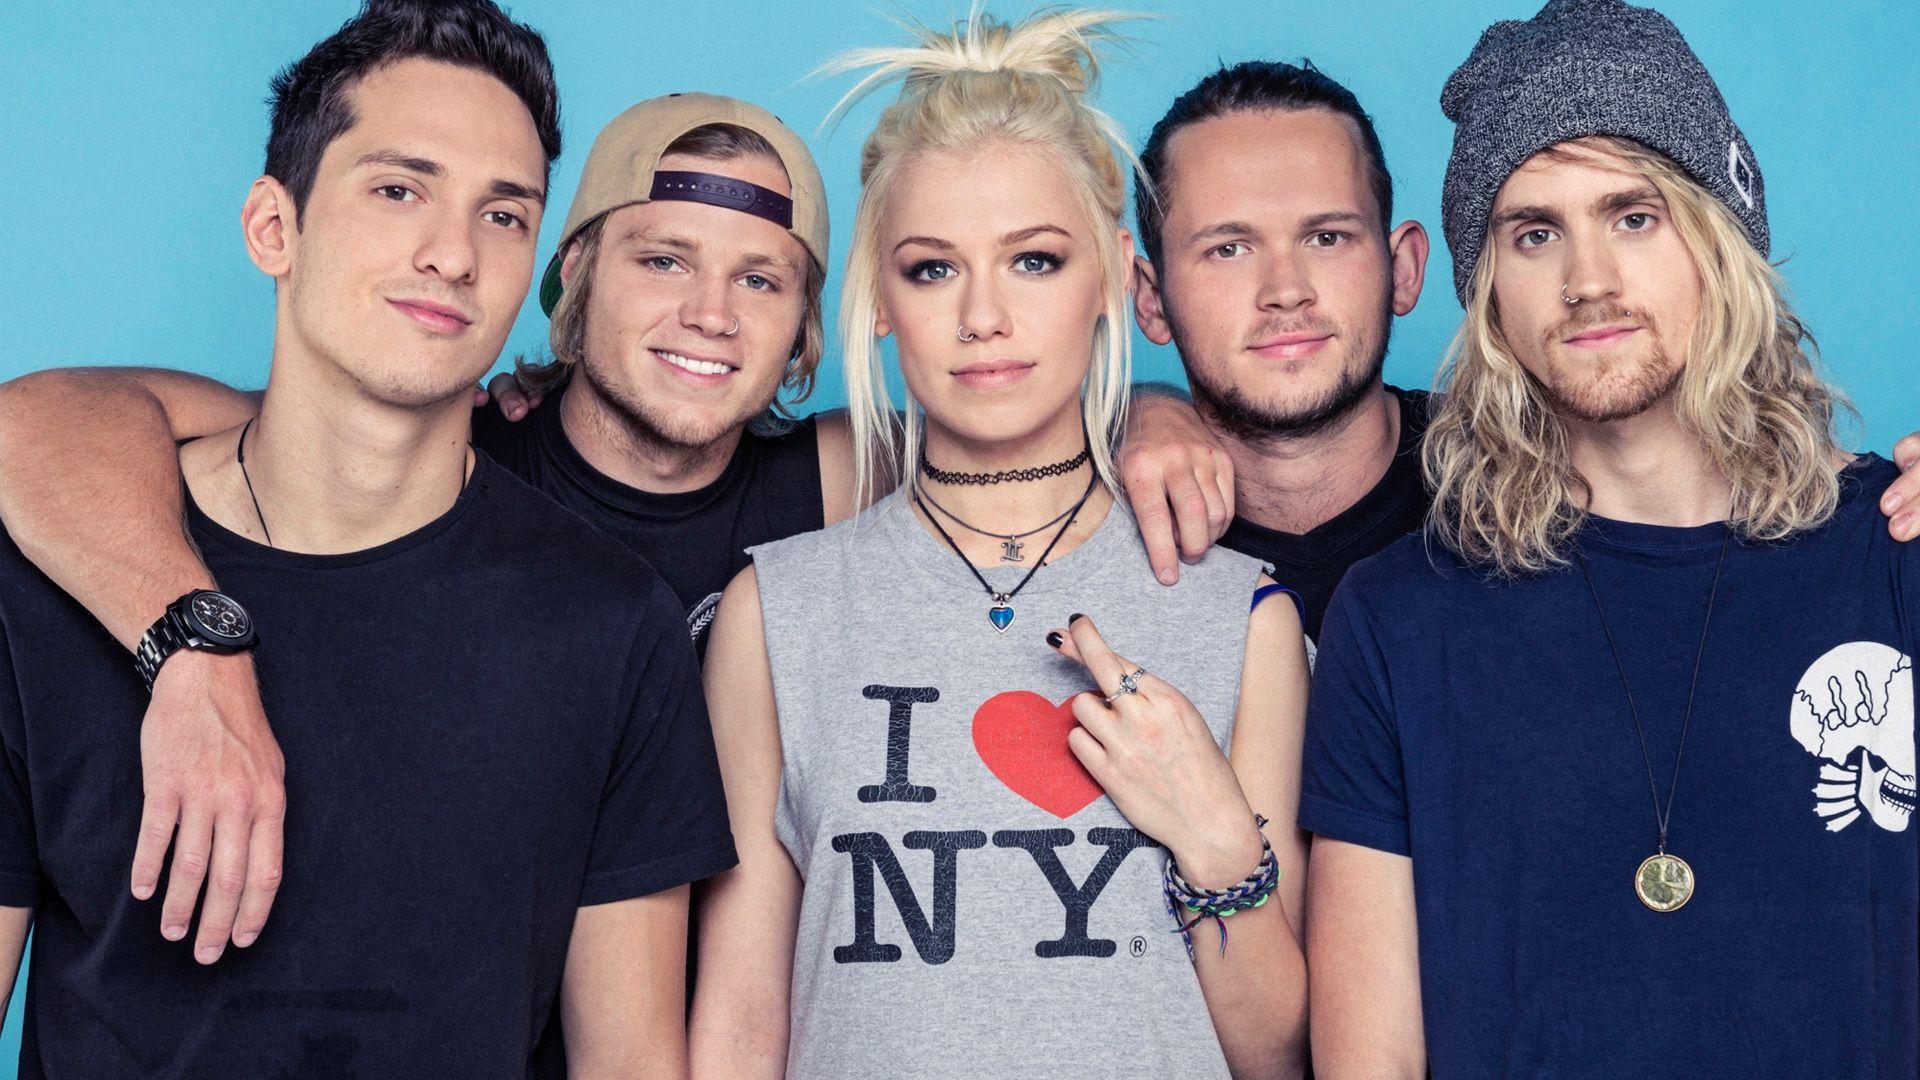 Tonight Alive Wallpaper Image Photo Picture Background